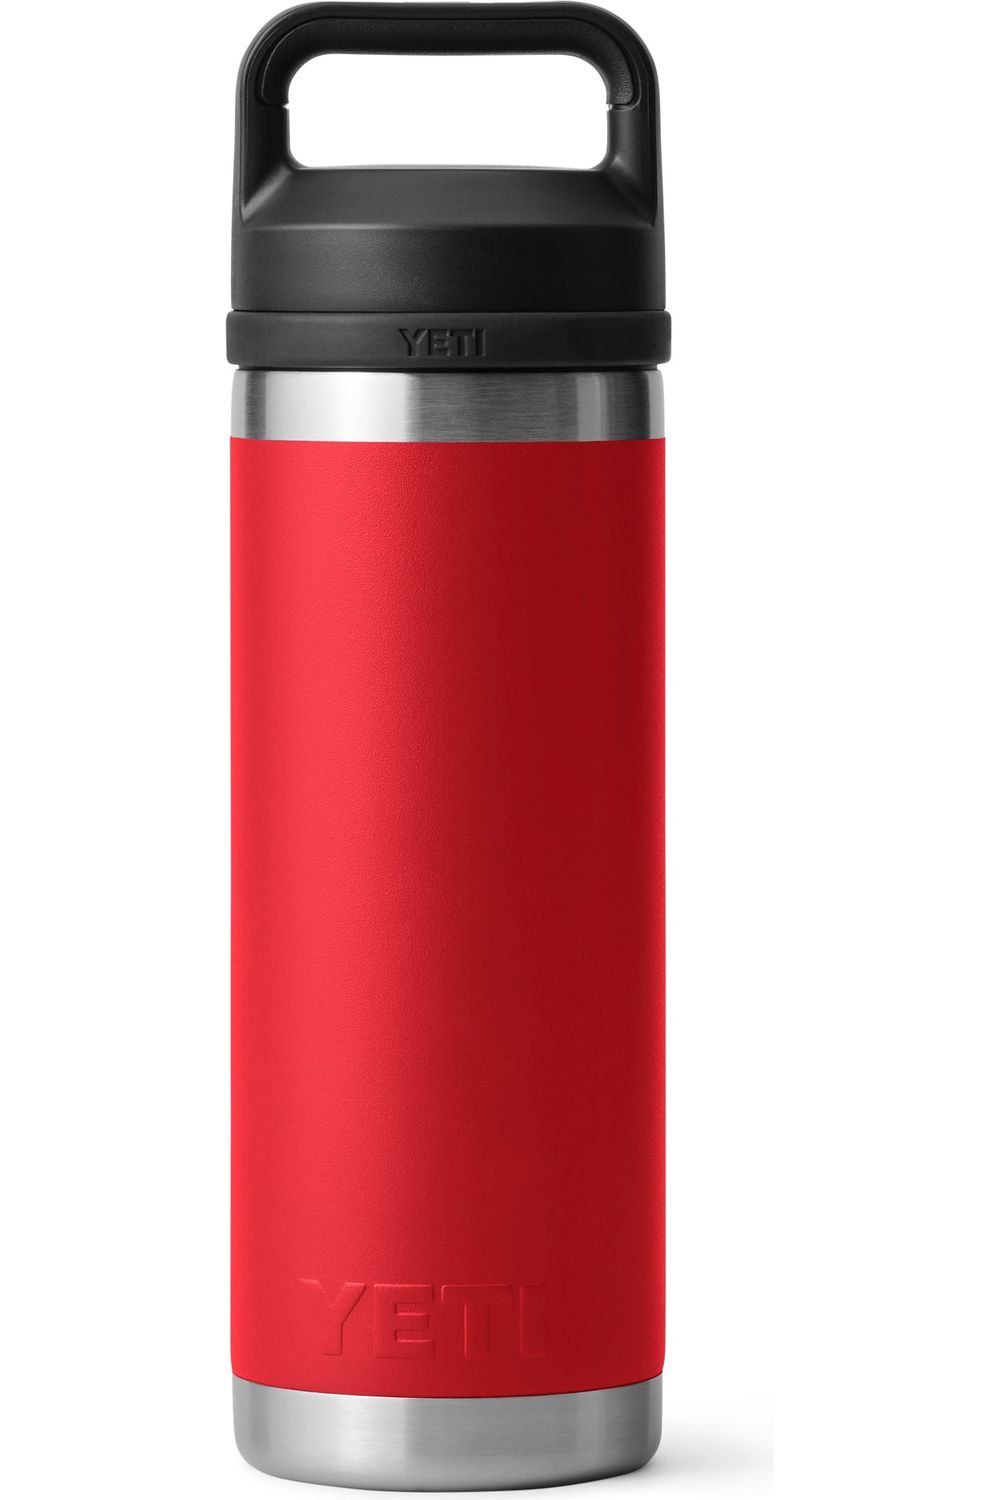 https://cdn.shopify.com/s/files/1/0601/0716/1785/products/YETI_Wholesale_1H23_Drinkware_Rambler_18oz_Rescue_Red_Bottle_Back_4097_Primary_B_2400x2400_edc9ac9c-e360-4fd1-af44-460b00227a3a.jpg?v=1699049370&width=1000